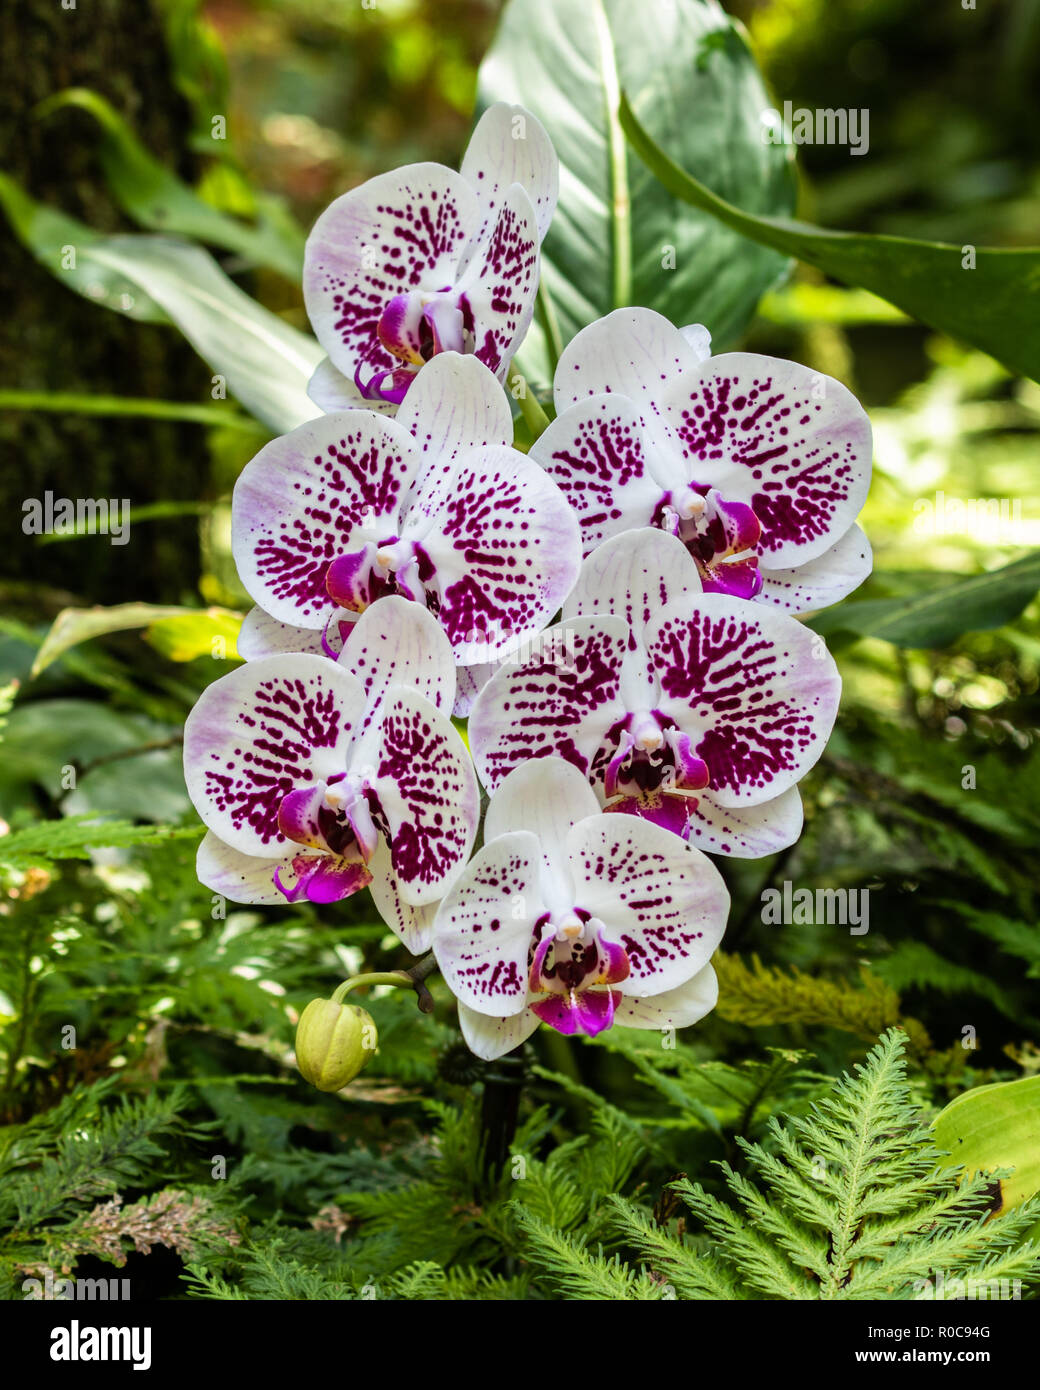 Bunch of phalaenopsis (moth shaped) orchids at Botanical garden in Hilo, Hawaii. White petals speckled with purple. Stock Photo